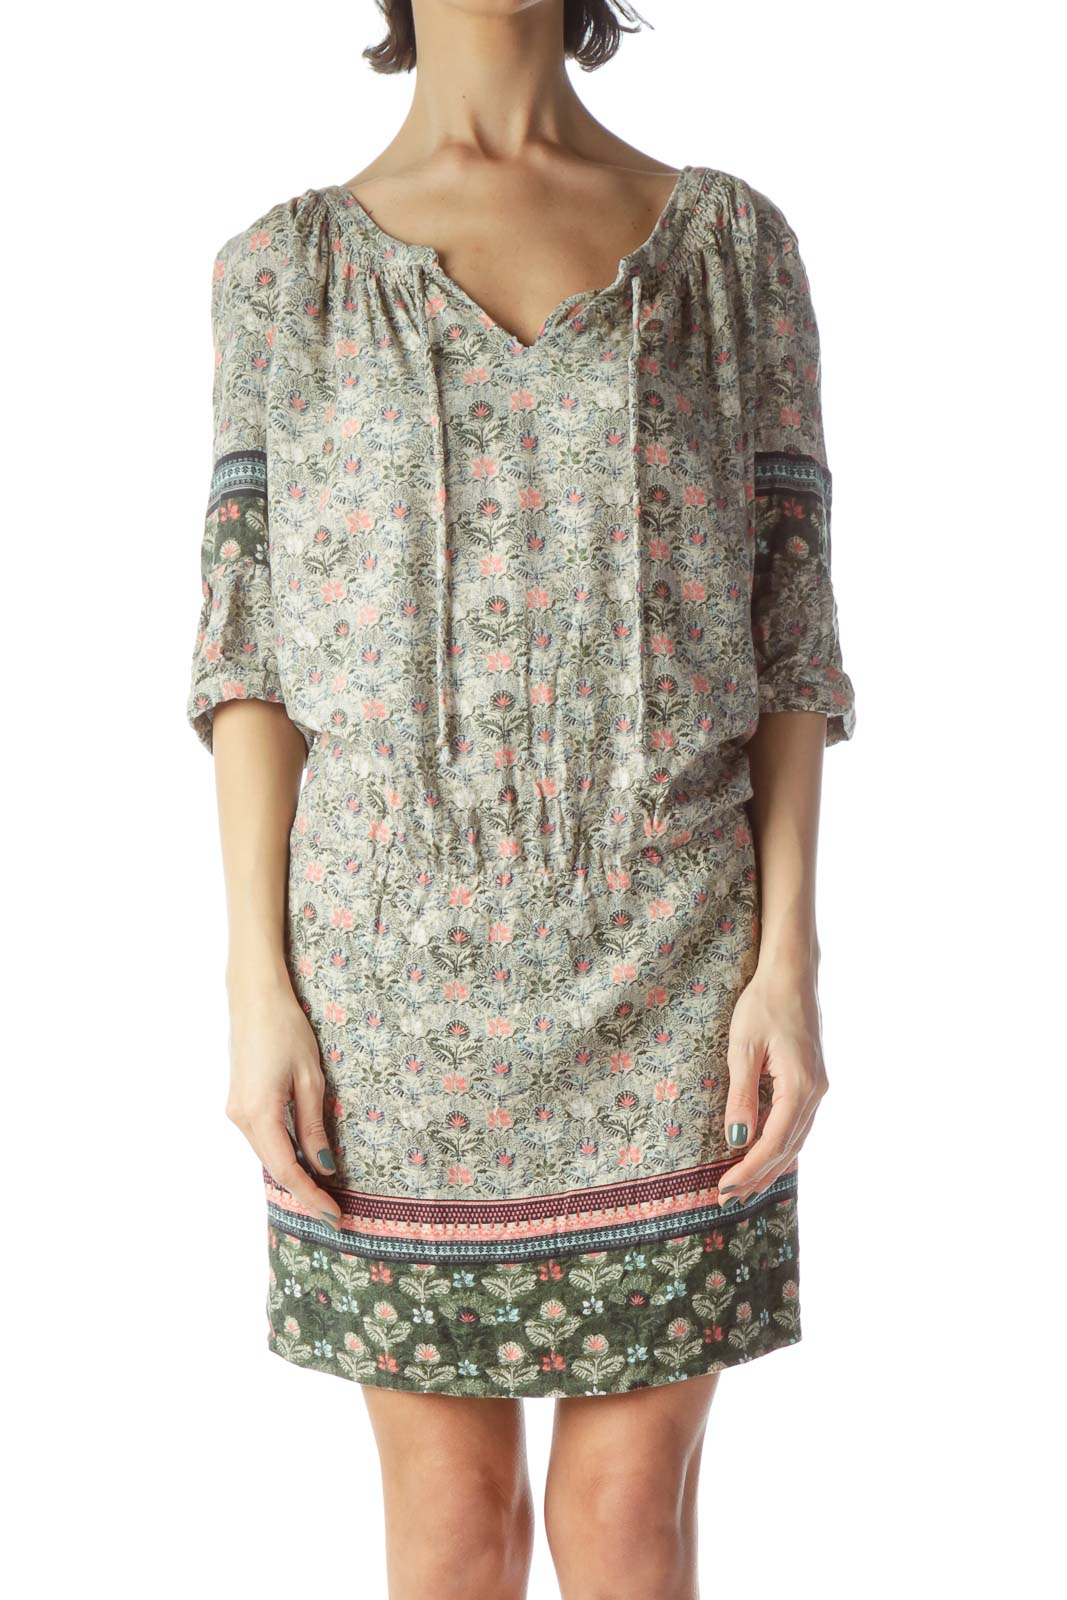 Multicolored Floral Print 3/4 Sleeve Day Dress Front